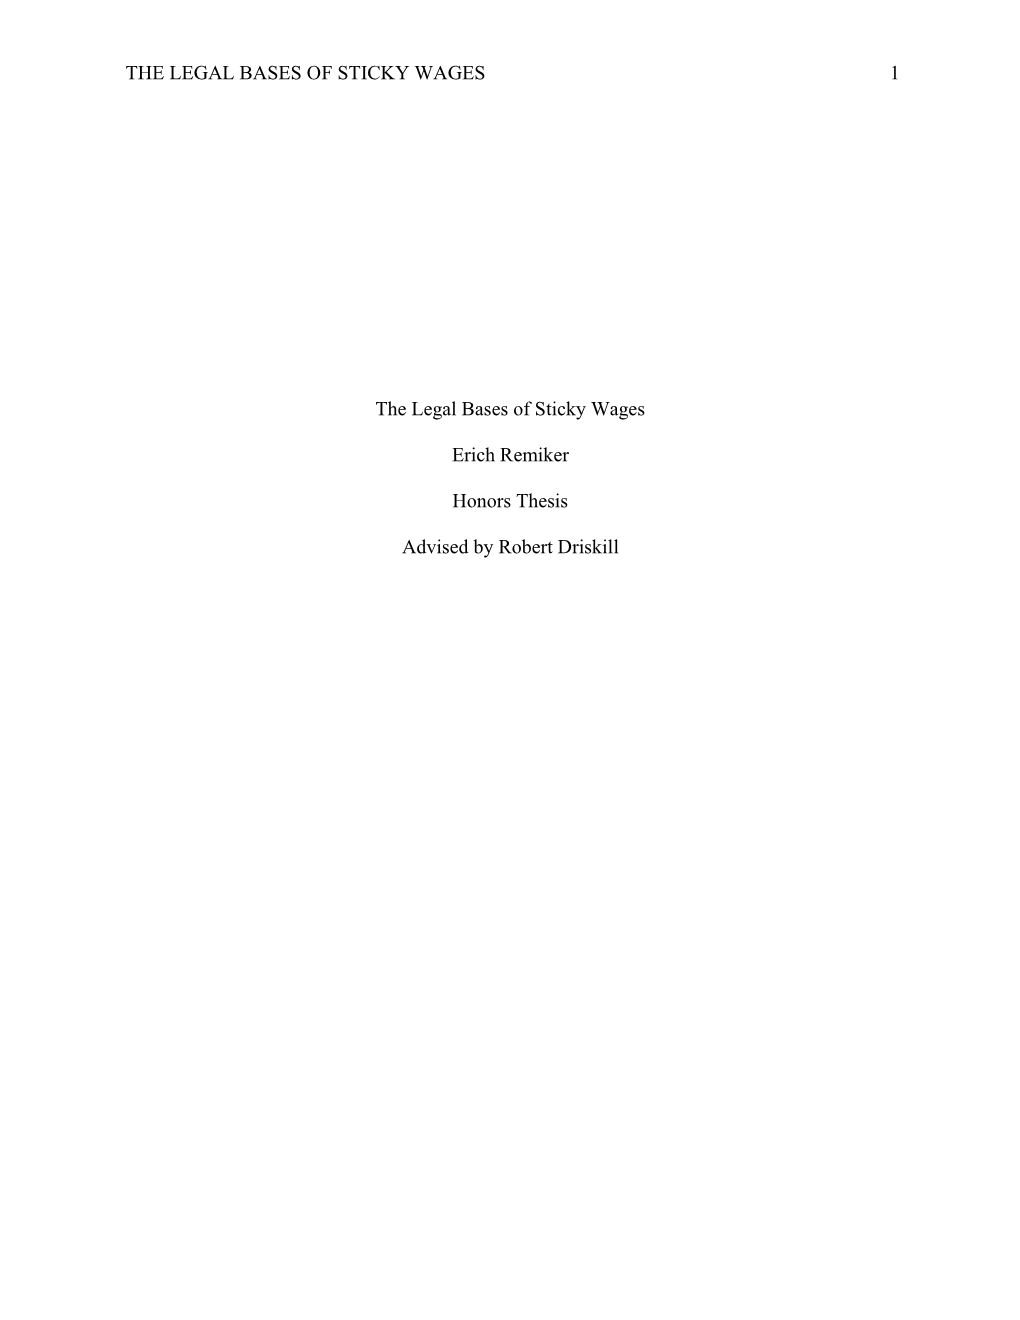 THE LEGAL BASES of STICKY WAGES 1 the Legal Bases of Sticky Wages Erich Remiker Honors Thesis Advised by Robert Driskill